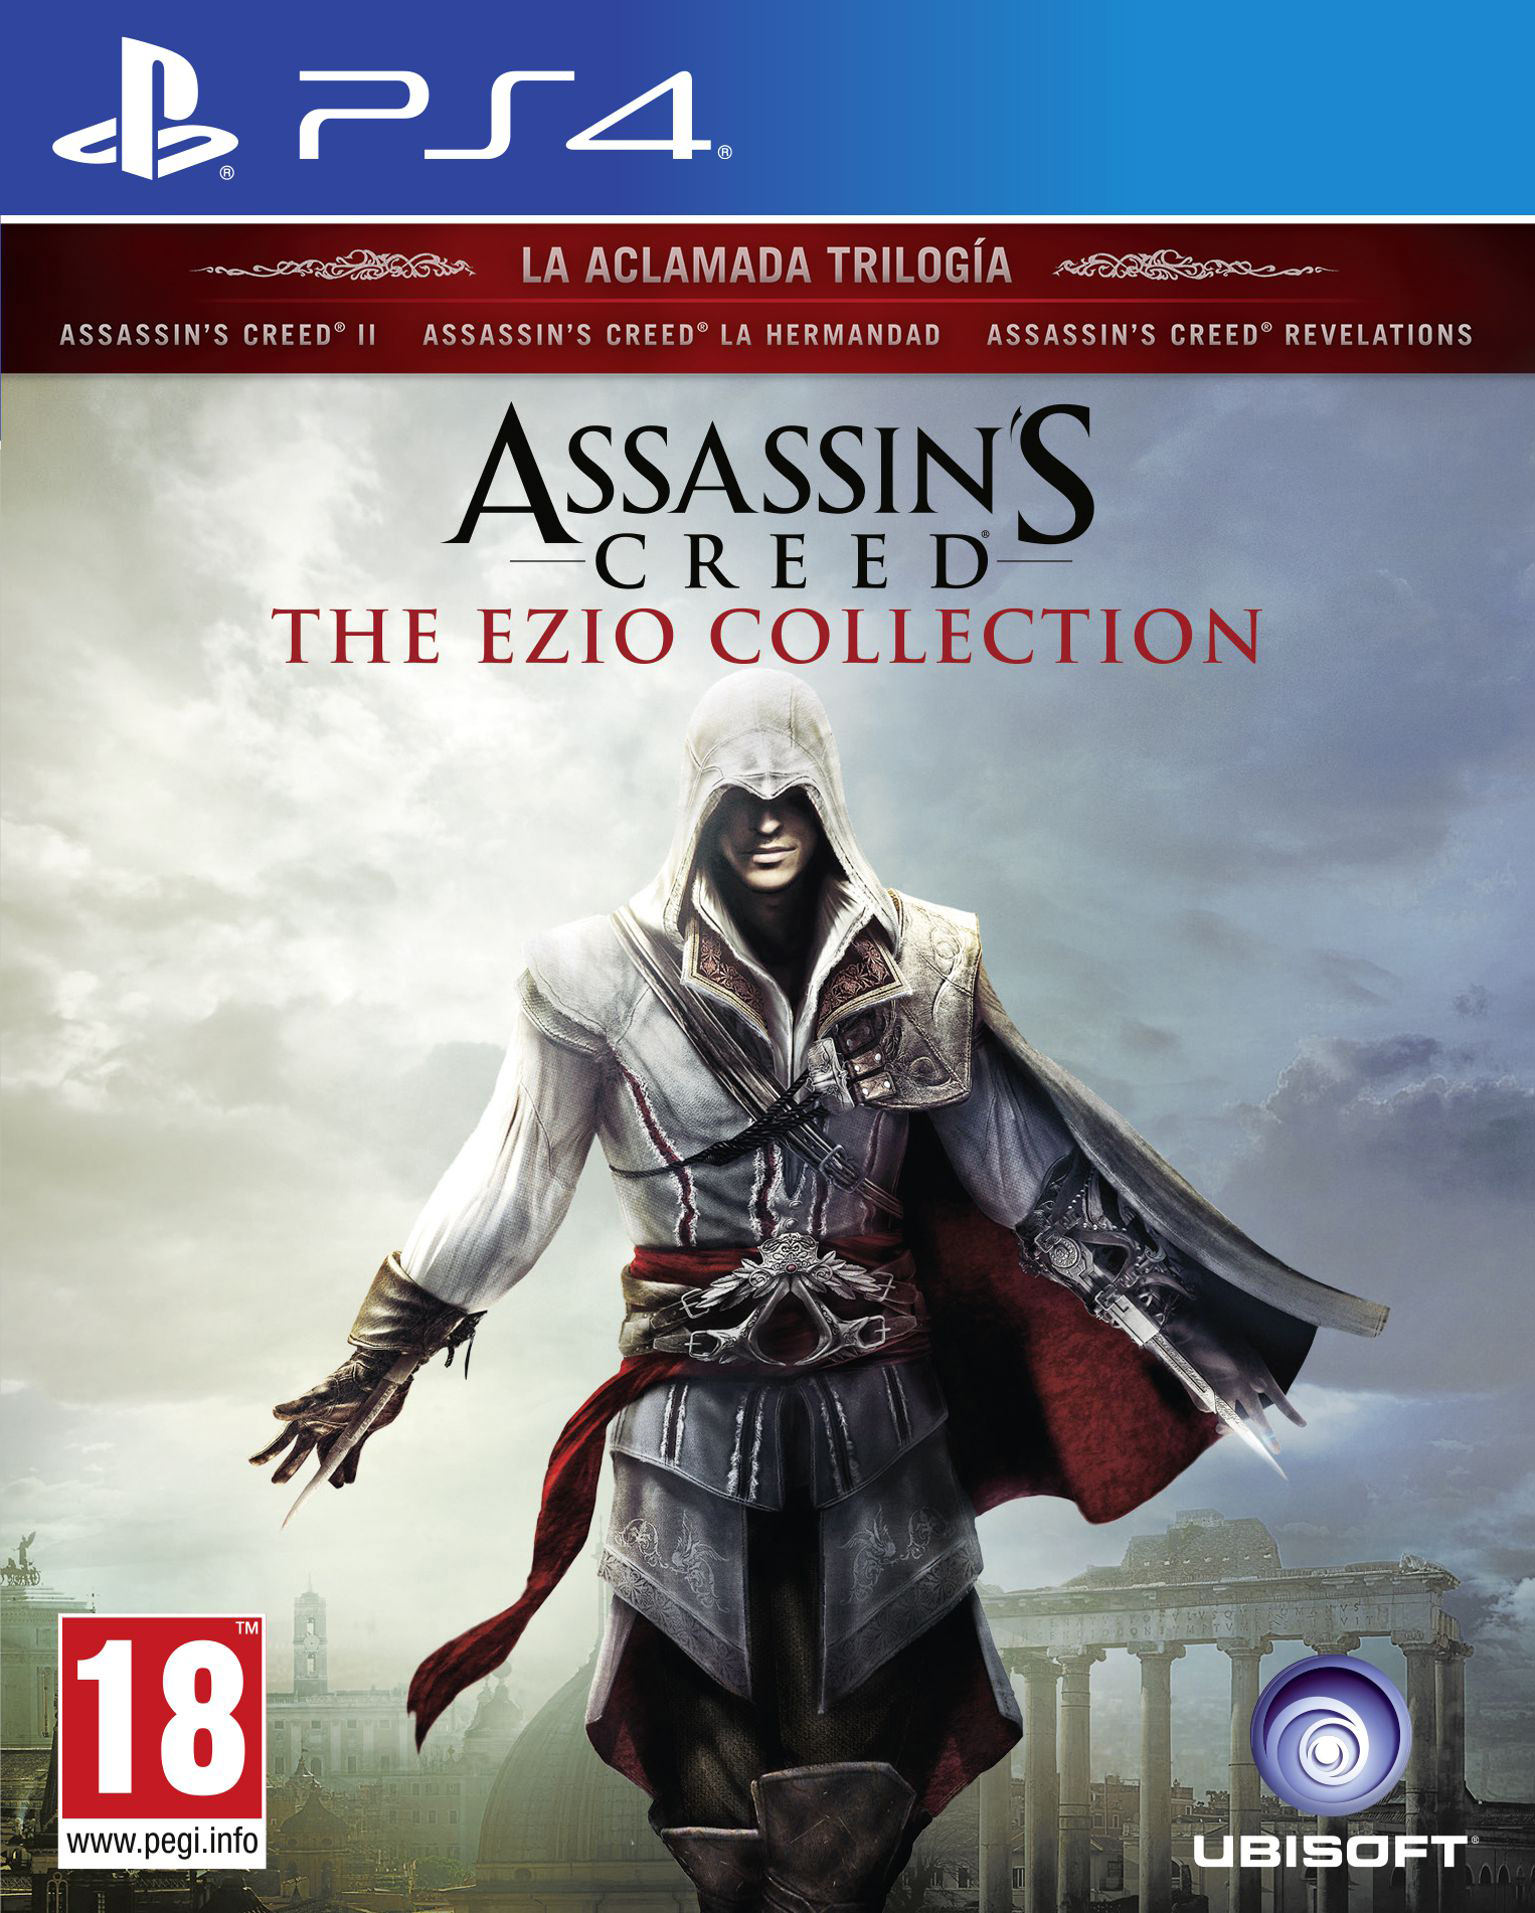 Assassin's Creed: The Ezio Collection [PS4] 5.05 / 6.72 / 7.02 [EUR] (2016) [Русский] (v1.02)